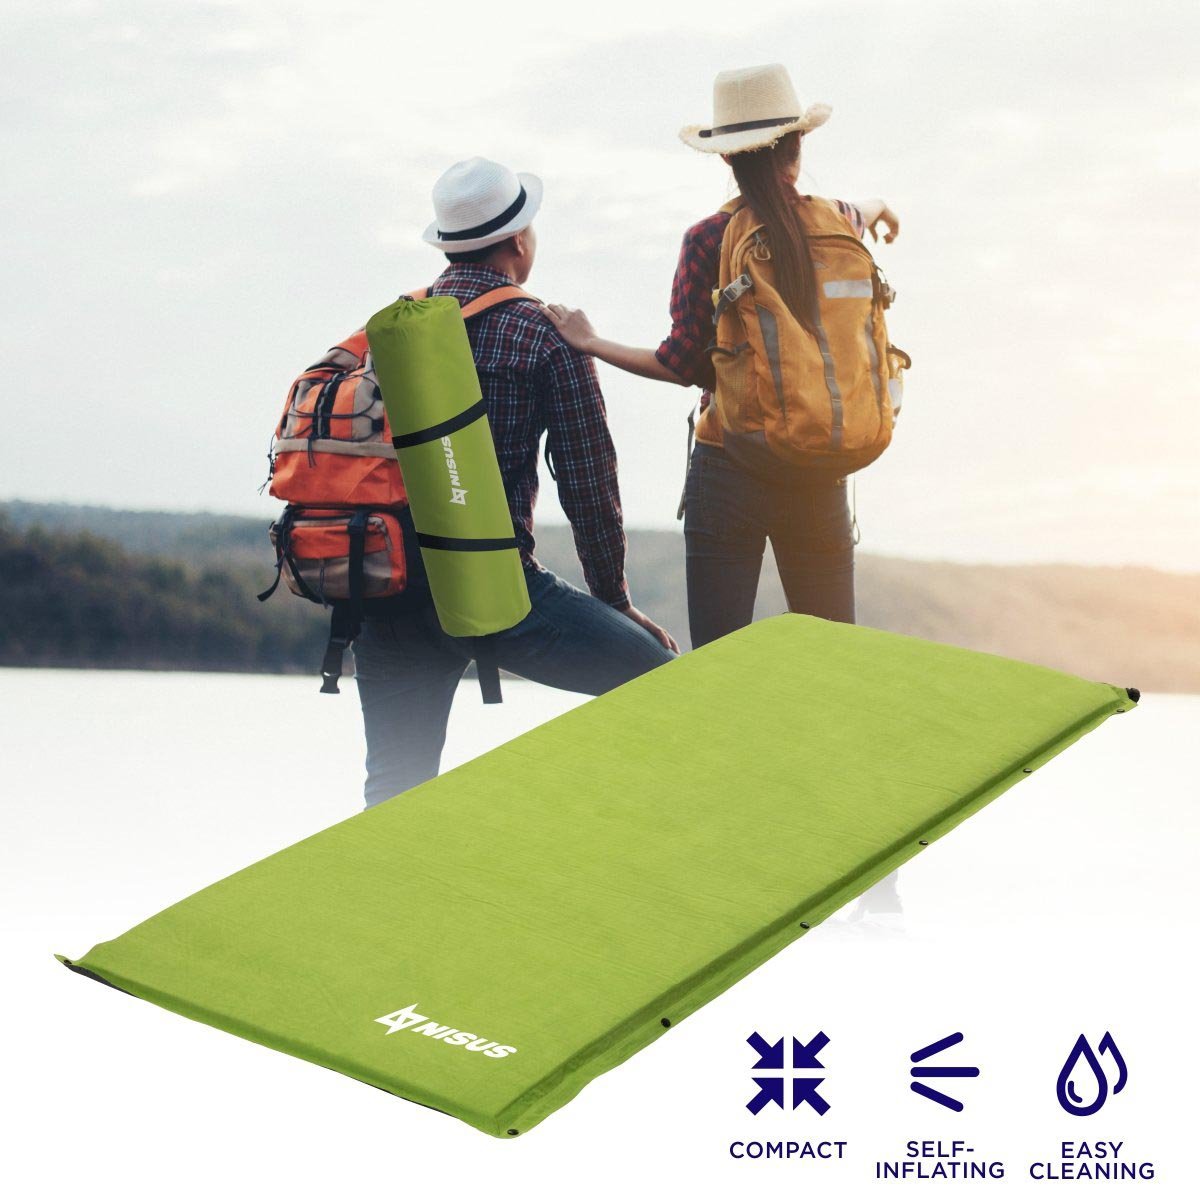 2-inch Lightweight Self Inflating Camping Sleeping Pad could be taken to any outdoor adventure